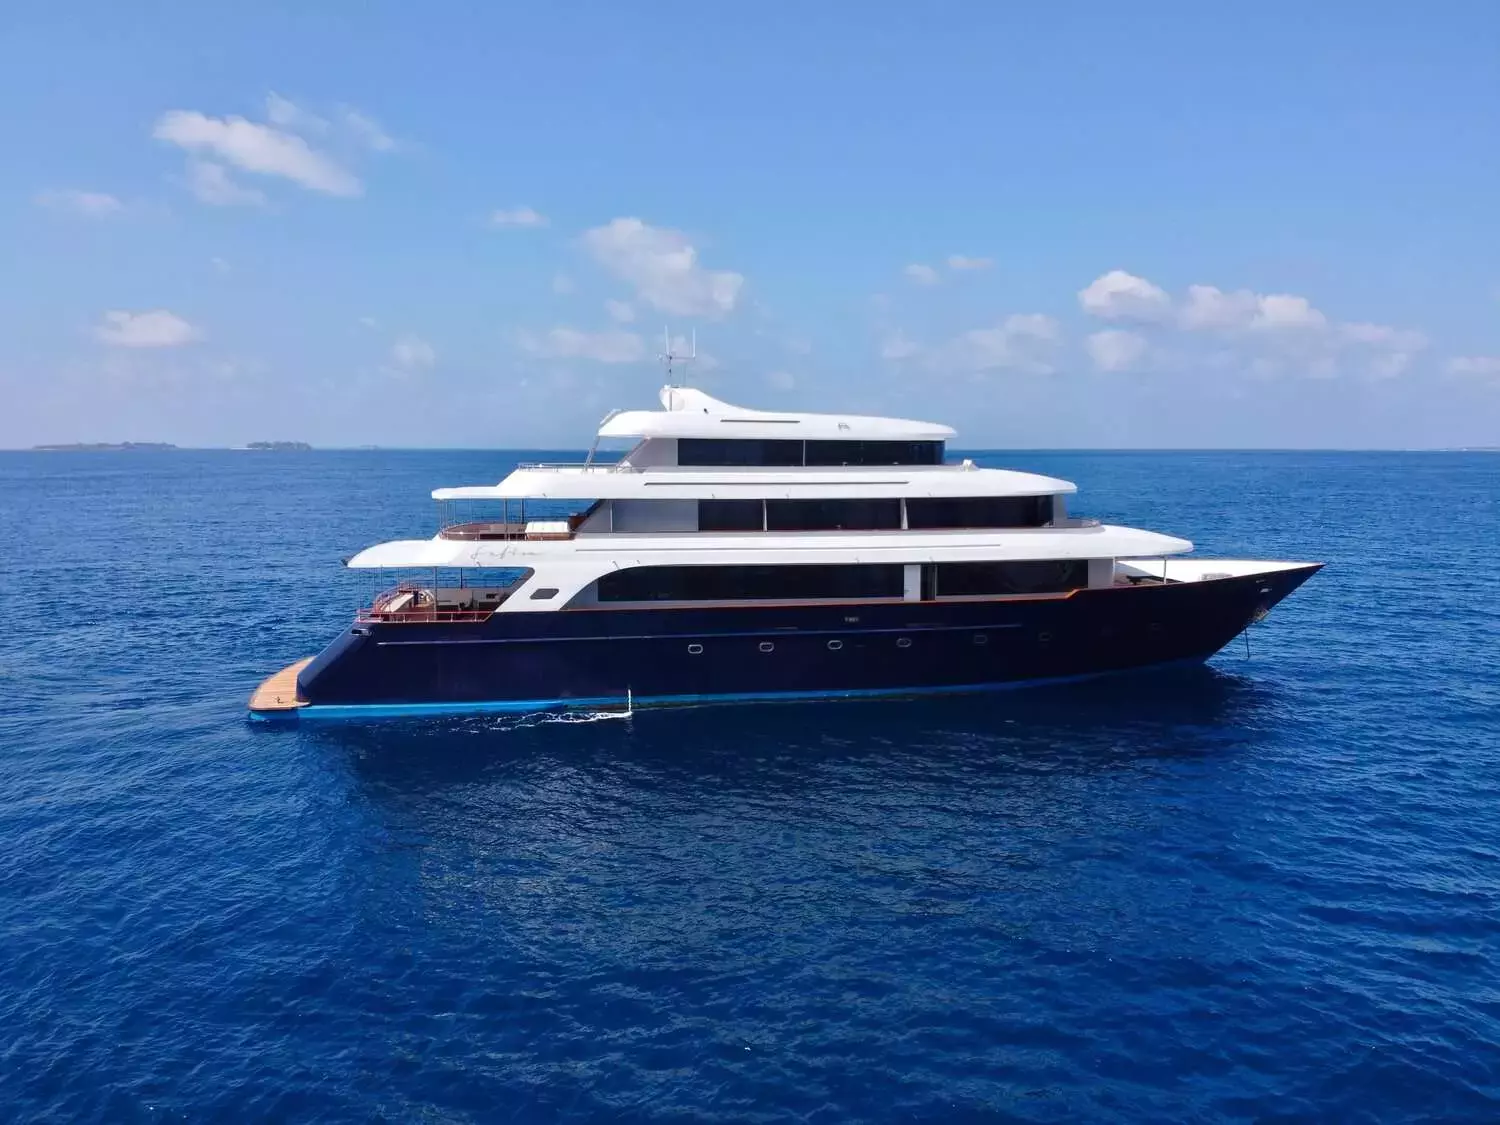 Safira by Custom Made - Top rates for a Charter of a private Superyacht in Tanzania